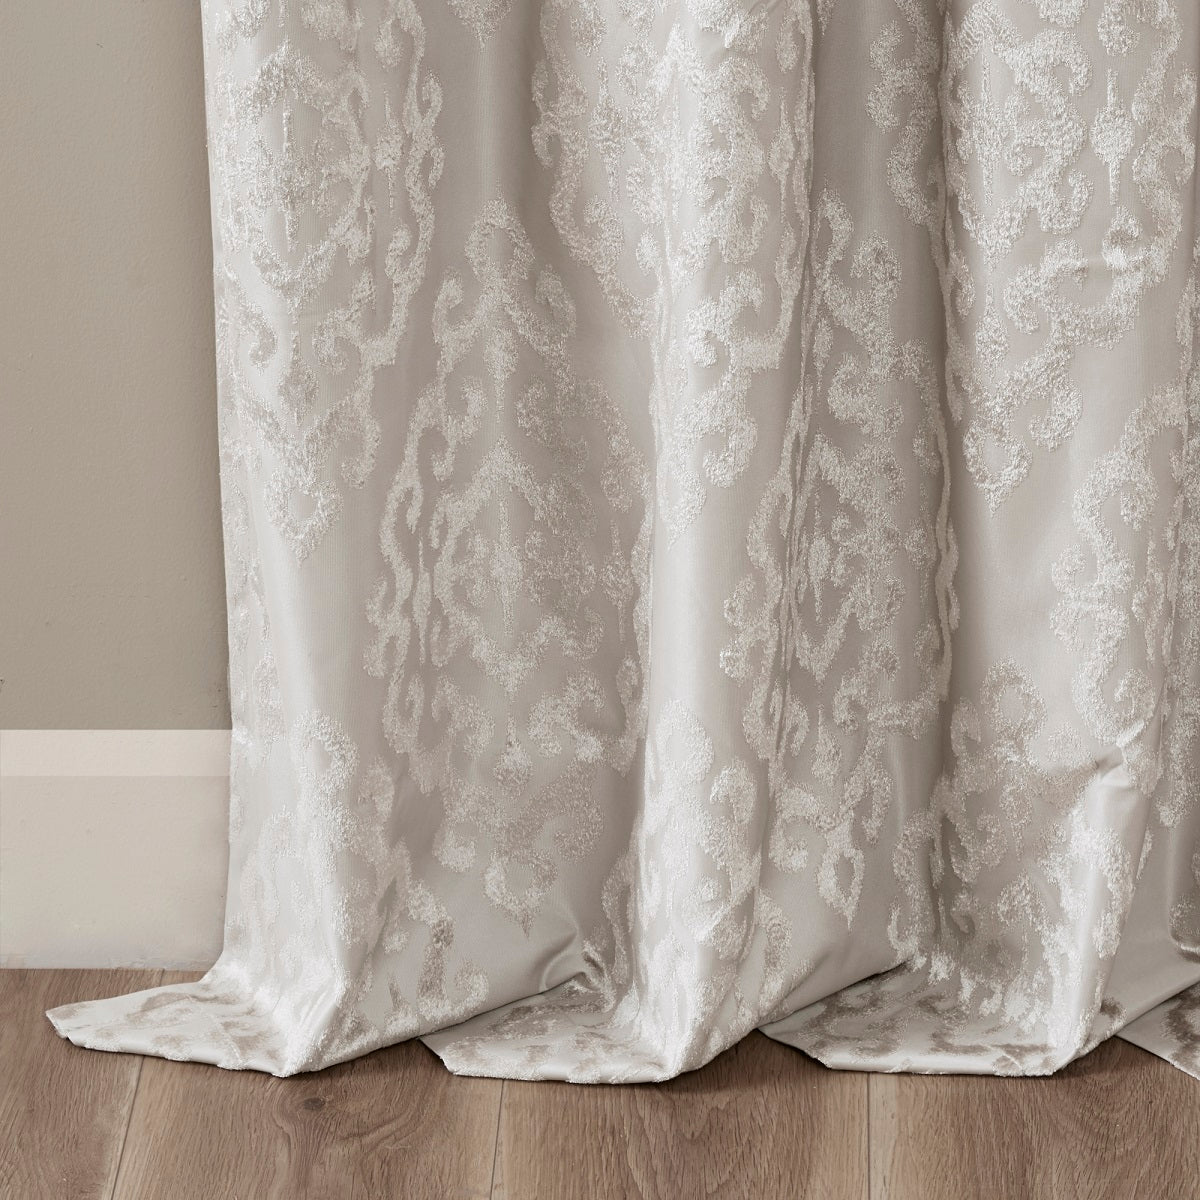 Knitted Jacquard Damask Total Blackout Grommet Top Curtain Panel - Silver